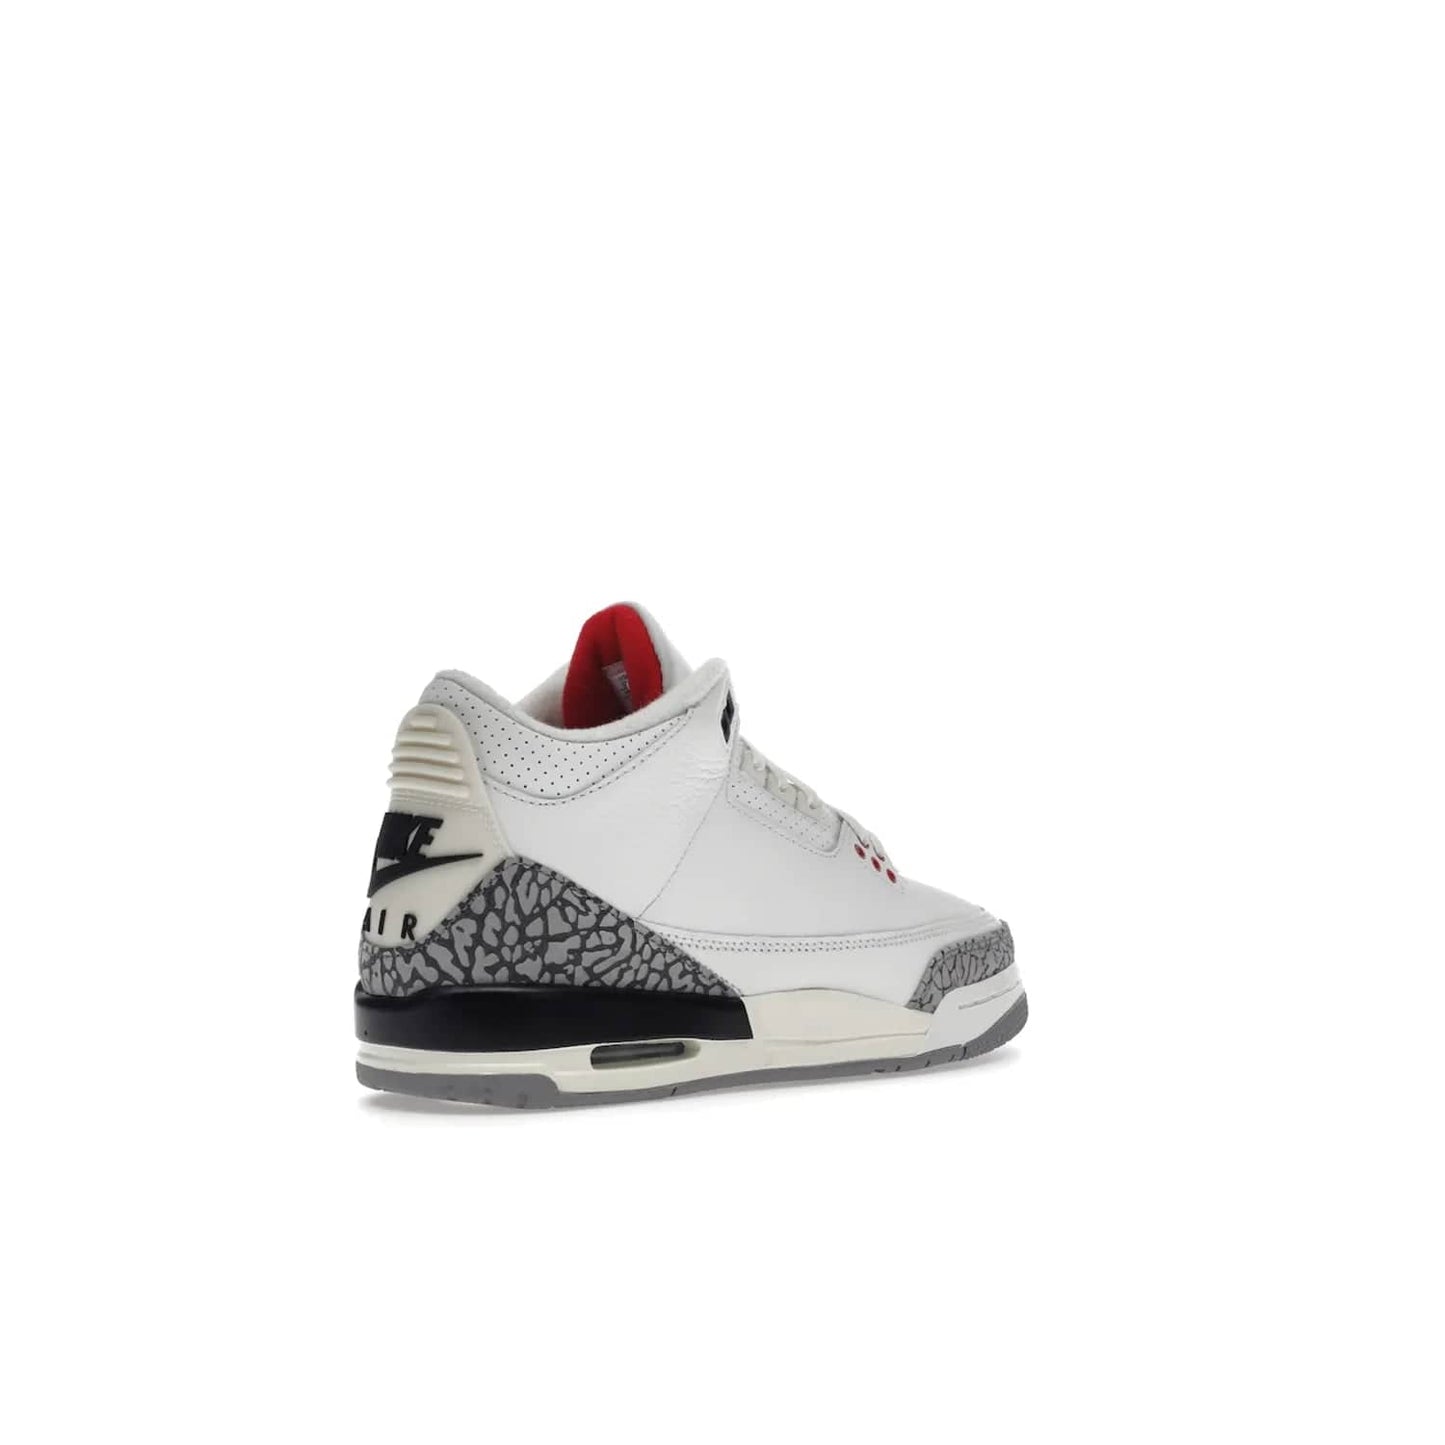 Jordan 3 Retro White Cement Reimagined (GS) - Image 33 - Only at www.BallersClubKickz.com - Grab the perfect blend of modern design and classic style with the Jordan 3 Retro White Cement Reimagined (GS). Features Summit White, Fire Red, Black, and Cement Grey colorway, iconic Jordan logo embroidered on the tongue, and “Nike Air” branding. Limited availability, get your pair before March 11th 2023.